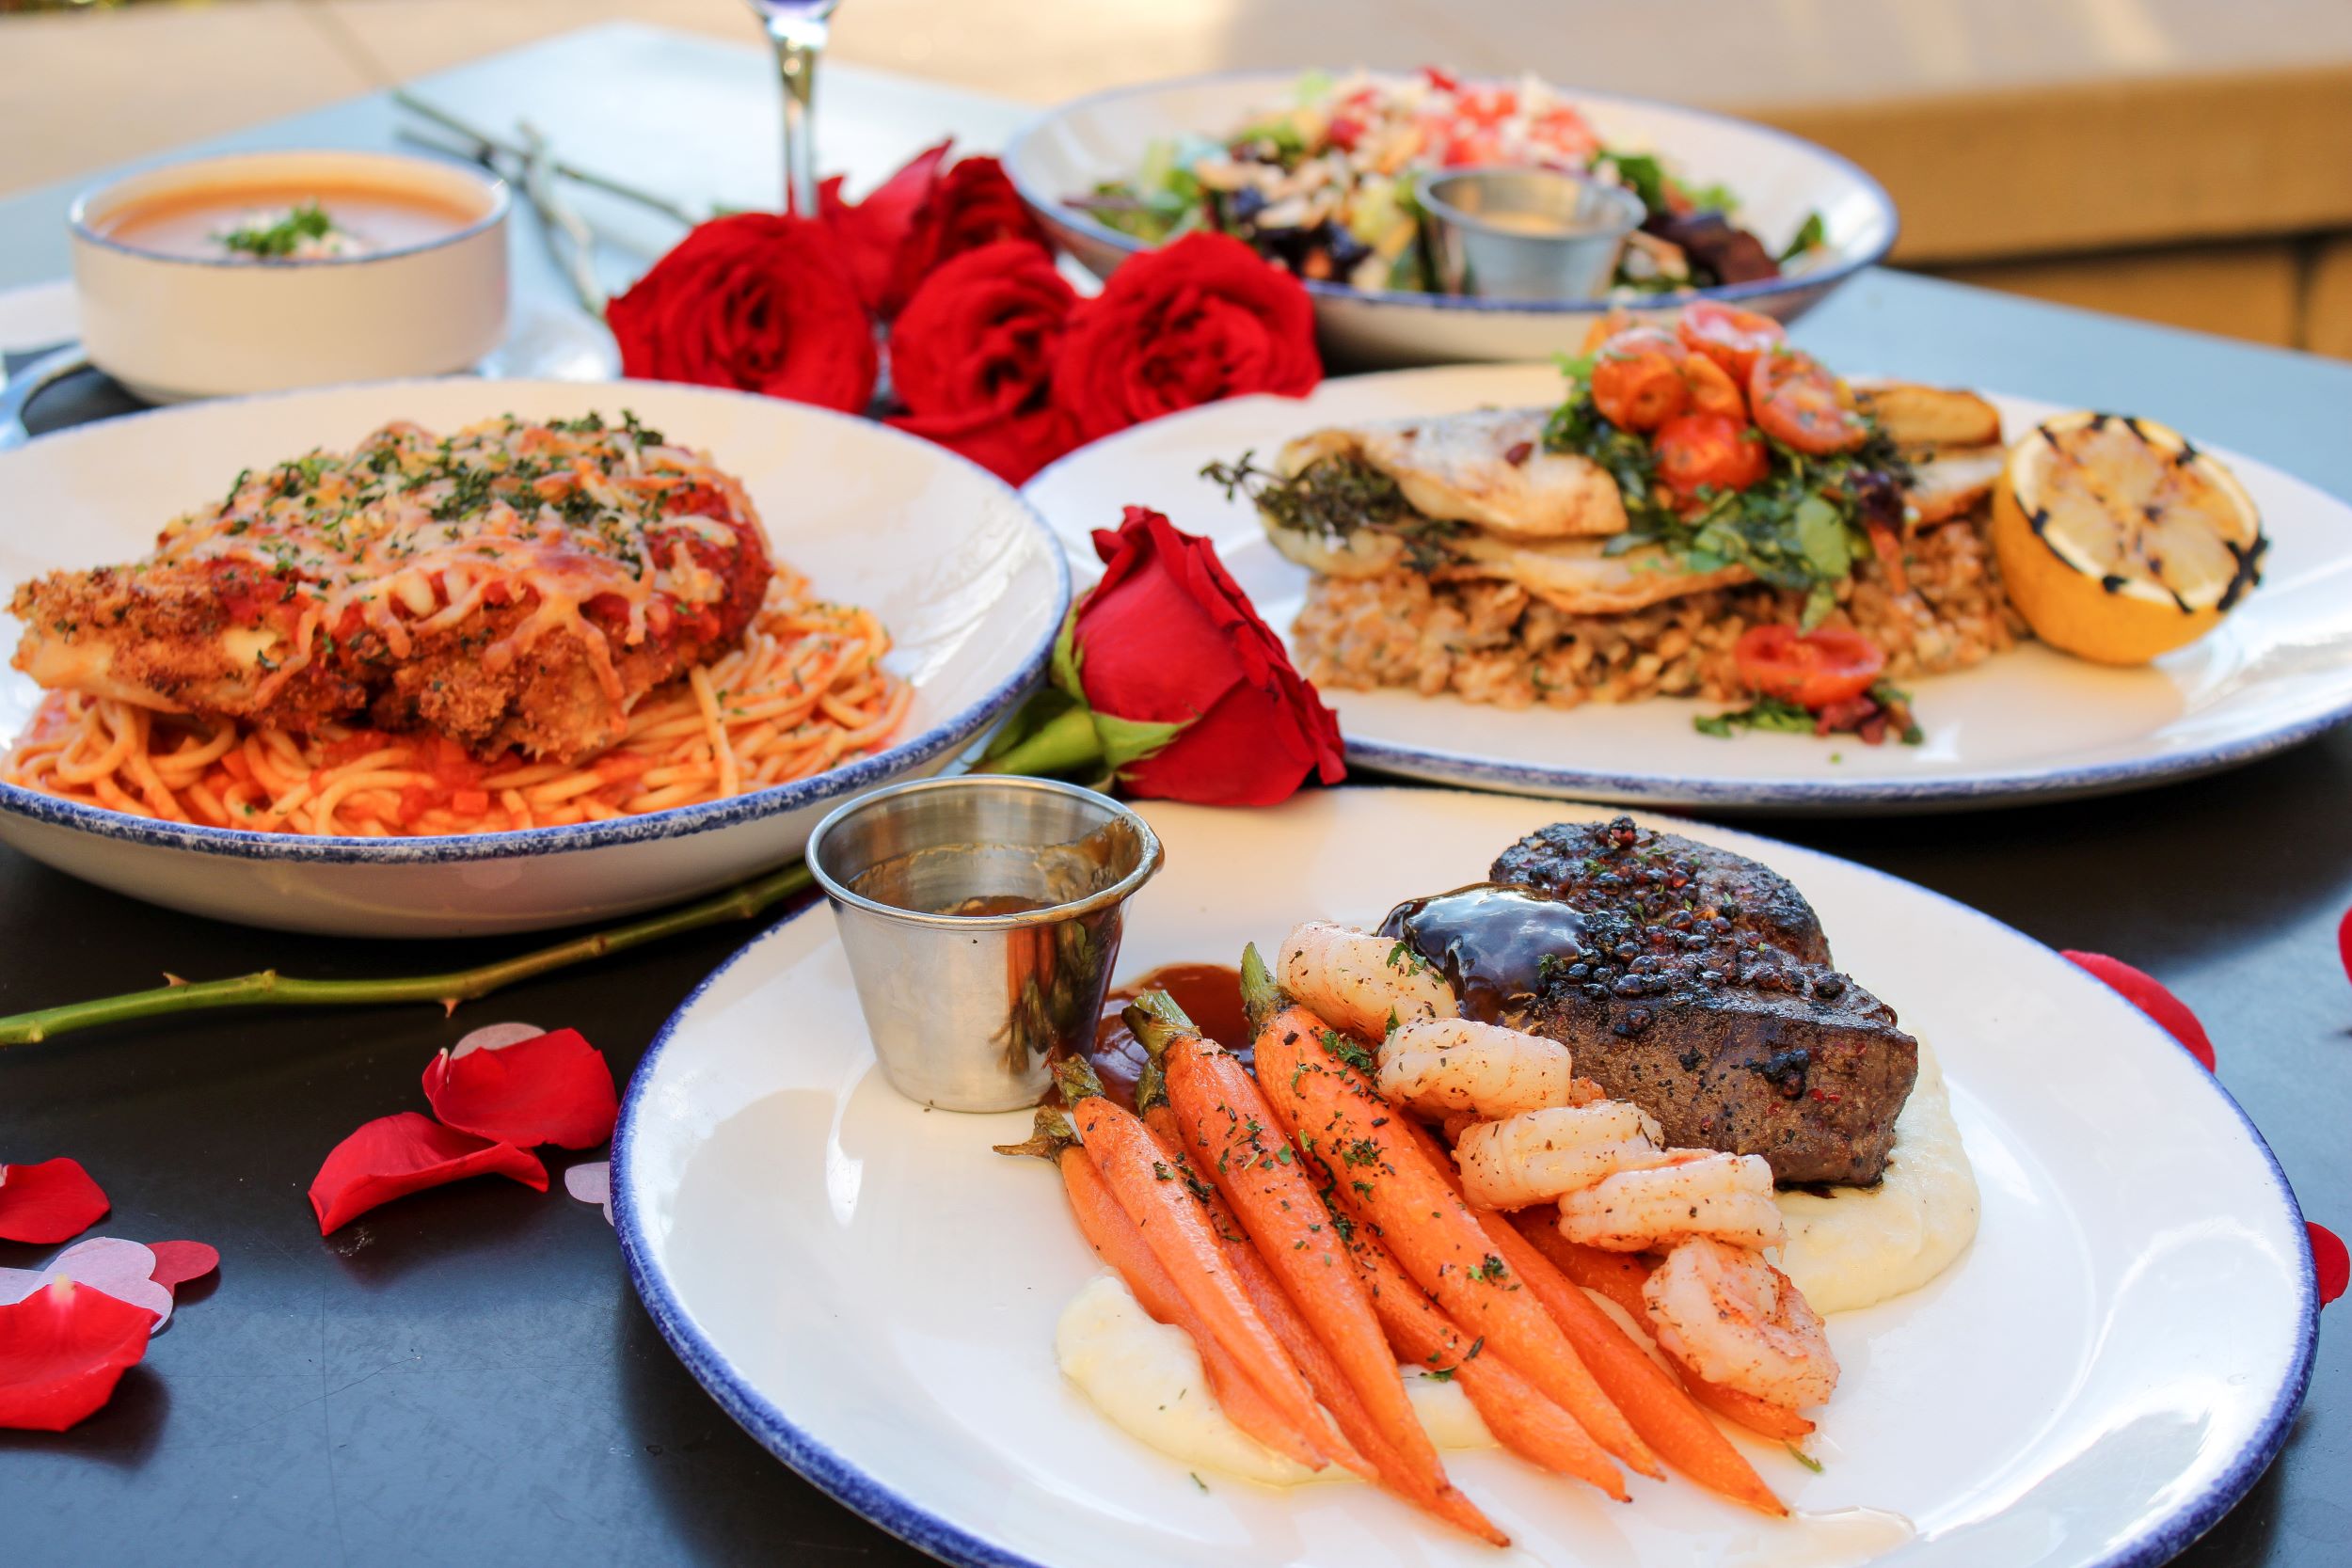 An image of the Valentine's Day spread at Beachside Restaurant & Bar.